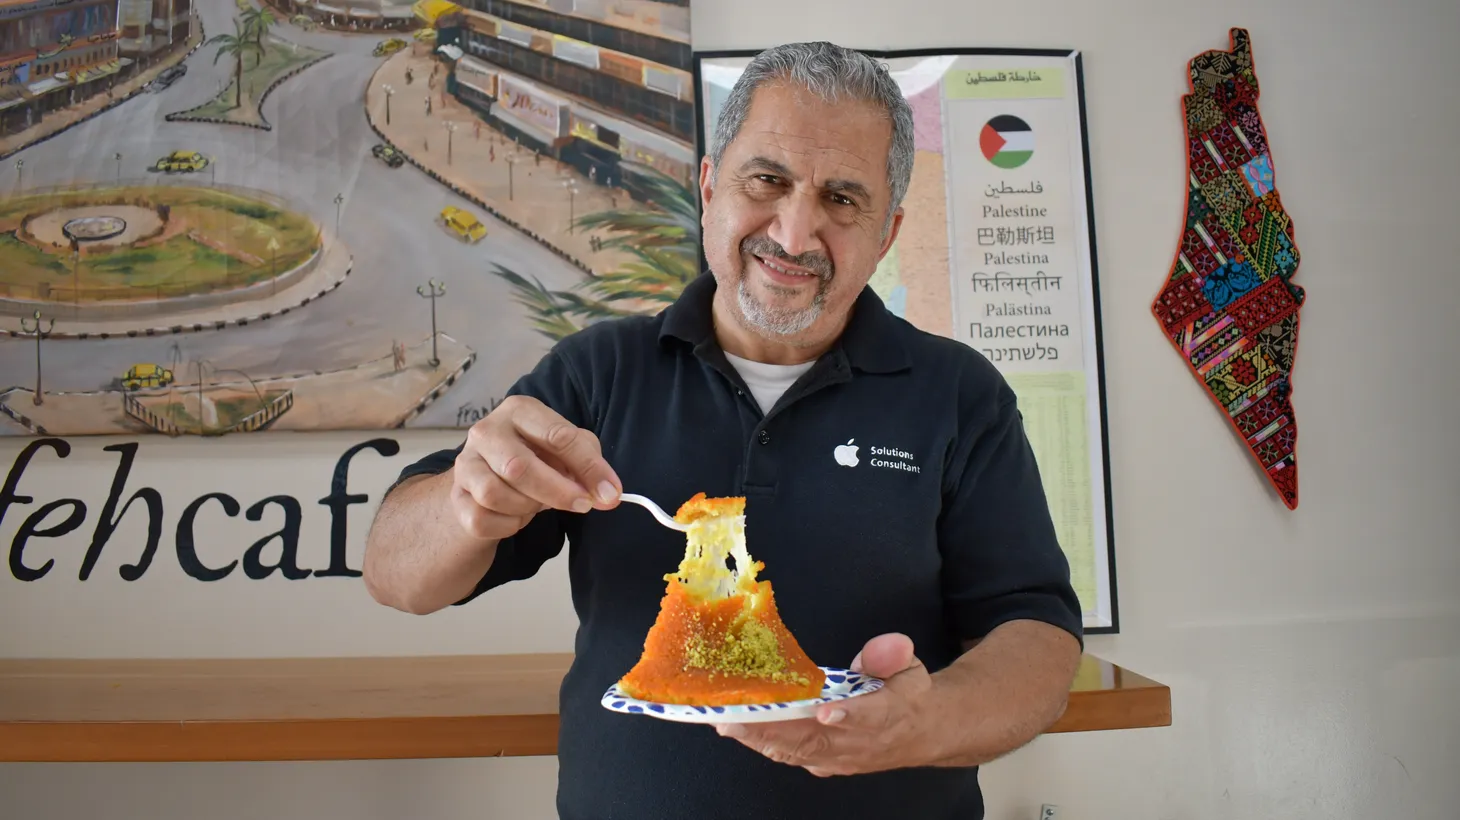 Asem Abusir opened Knafeh Cafe in Little Arabia more than a decade ago to sell his family’s longstanding take on the beloved Middle Eastern dessert called knafeh. “We chose Anaheim because we saw the growth of the Middle Eastern community,” says Abusir.